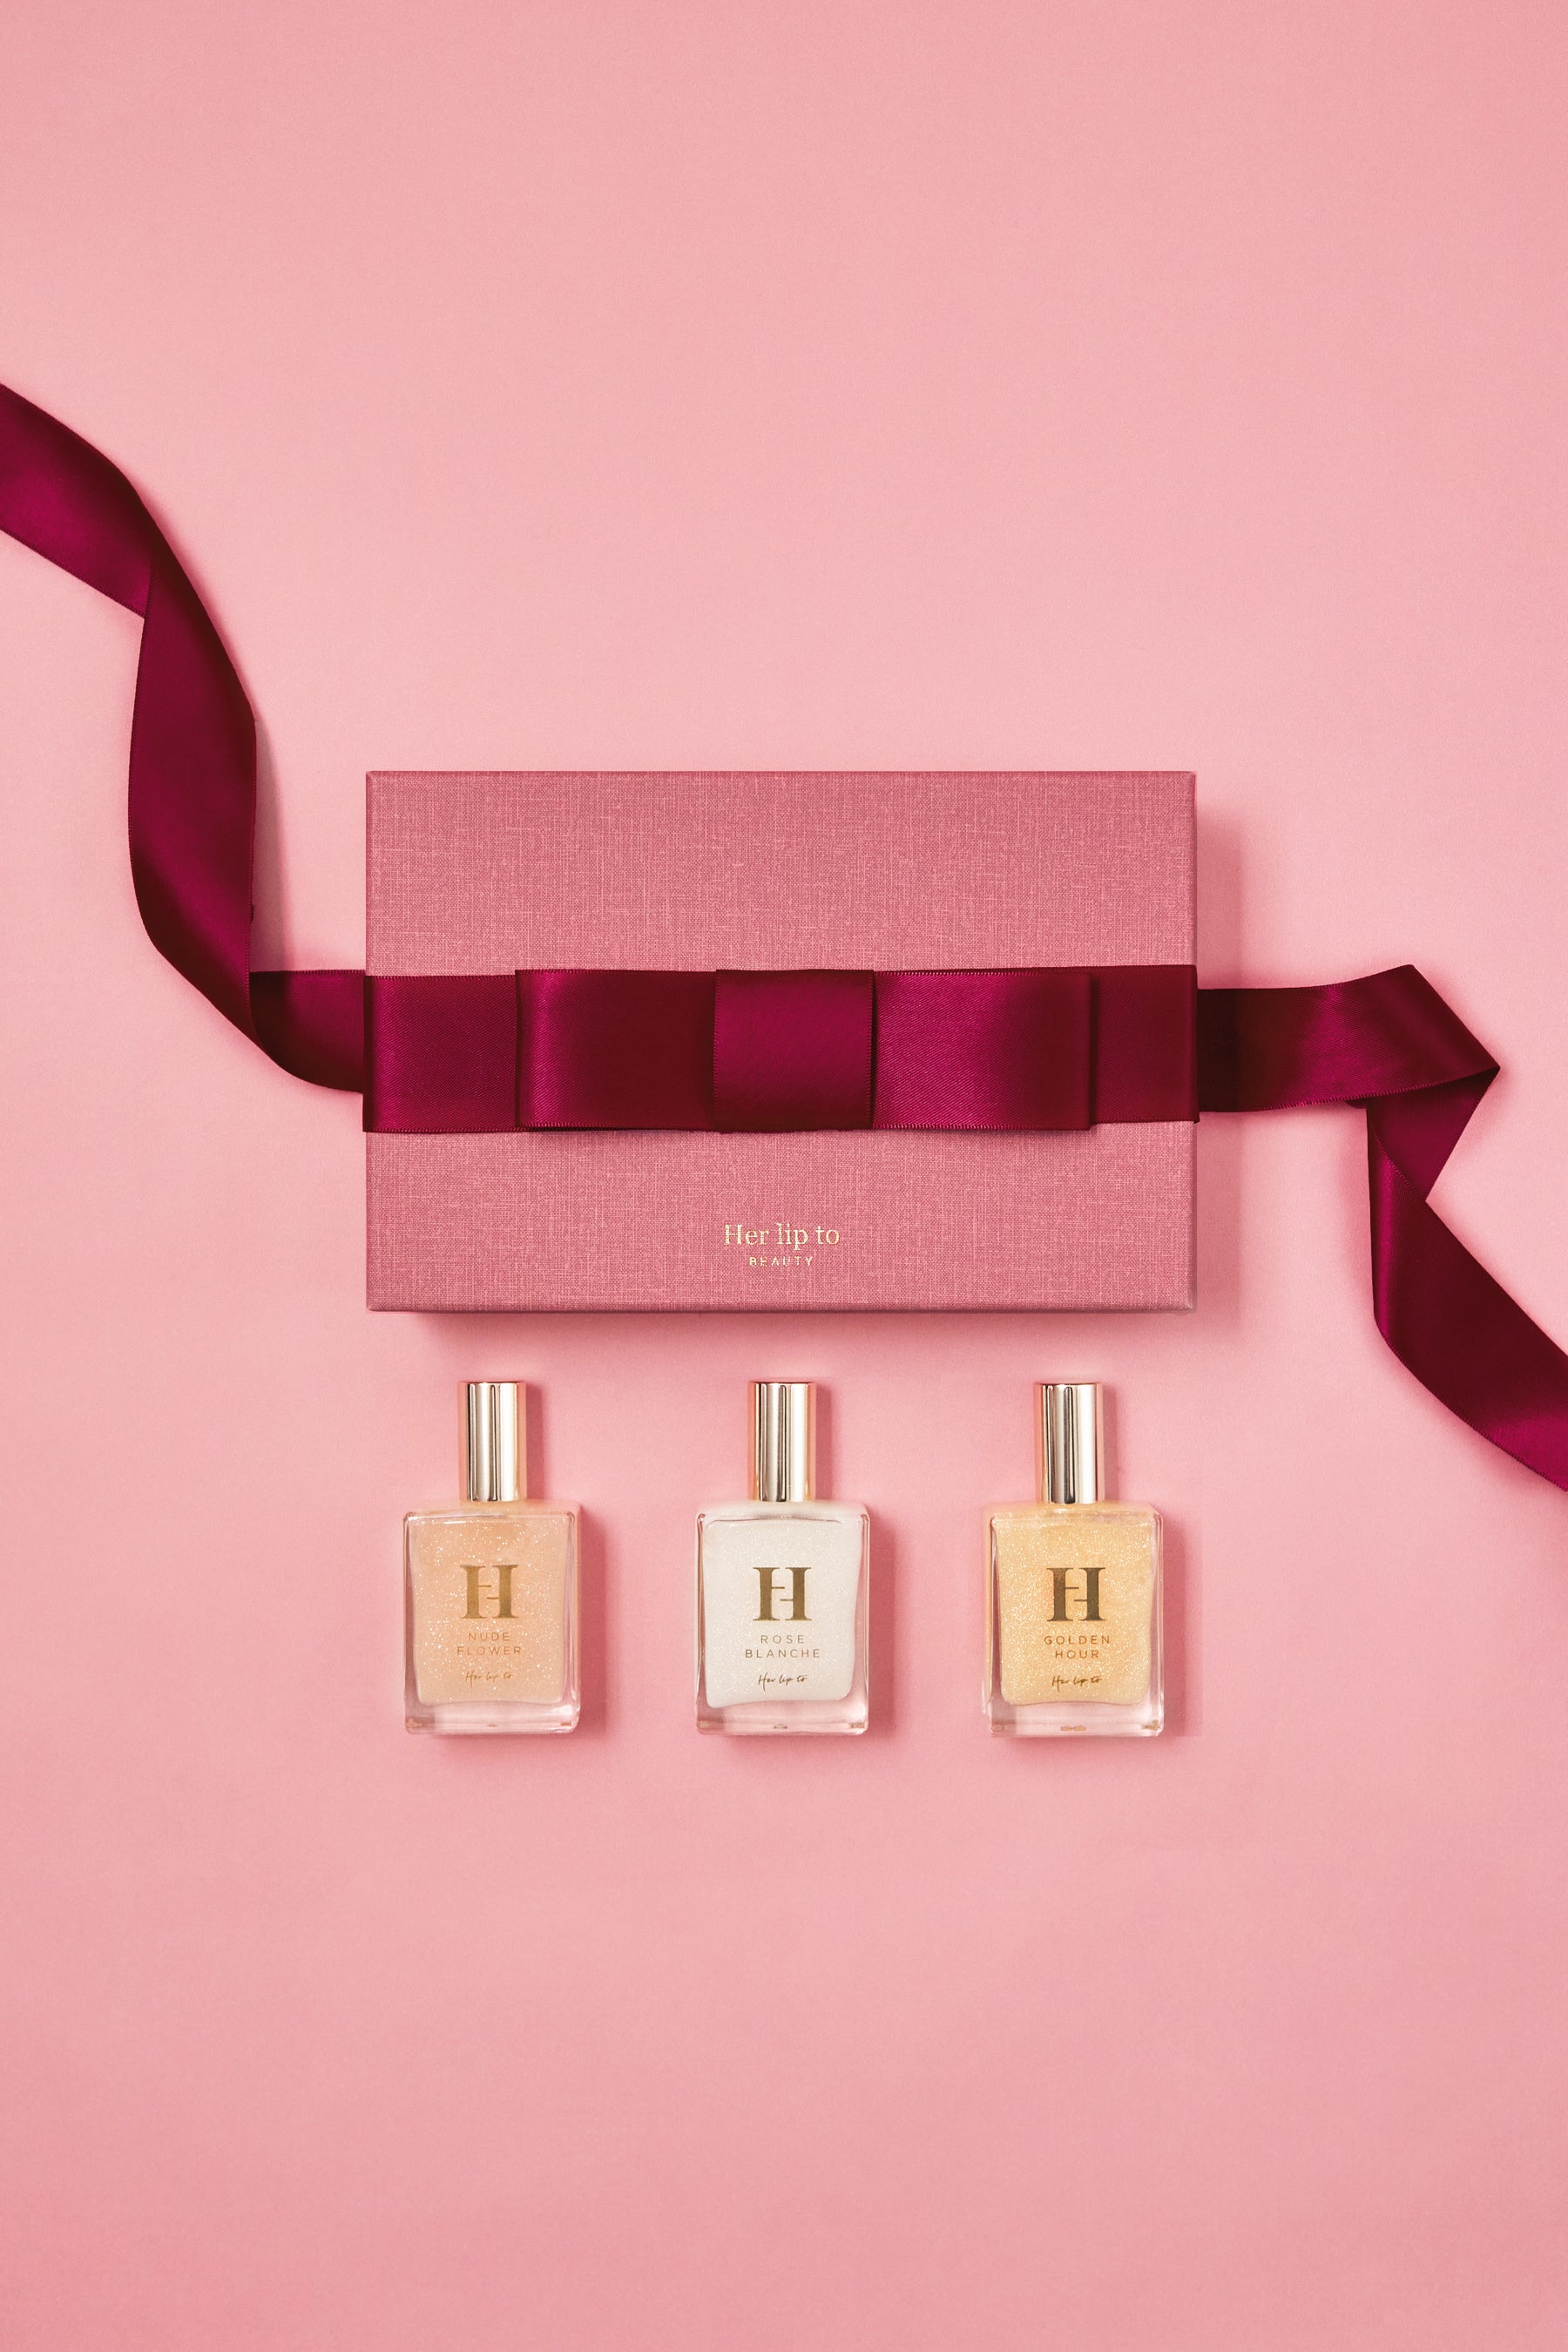 Her lip to PERFUME OIL by HLT